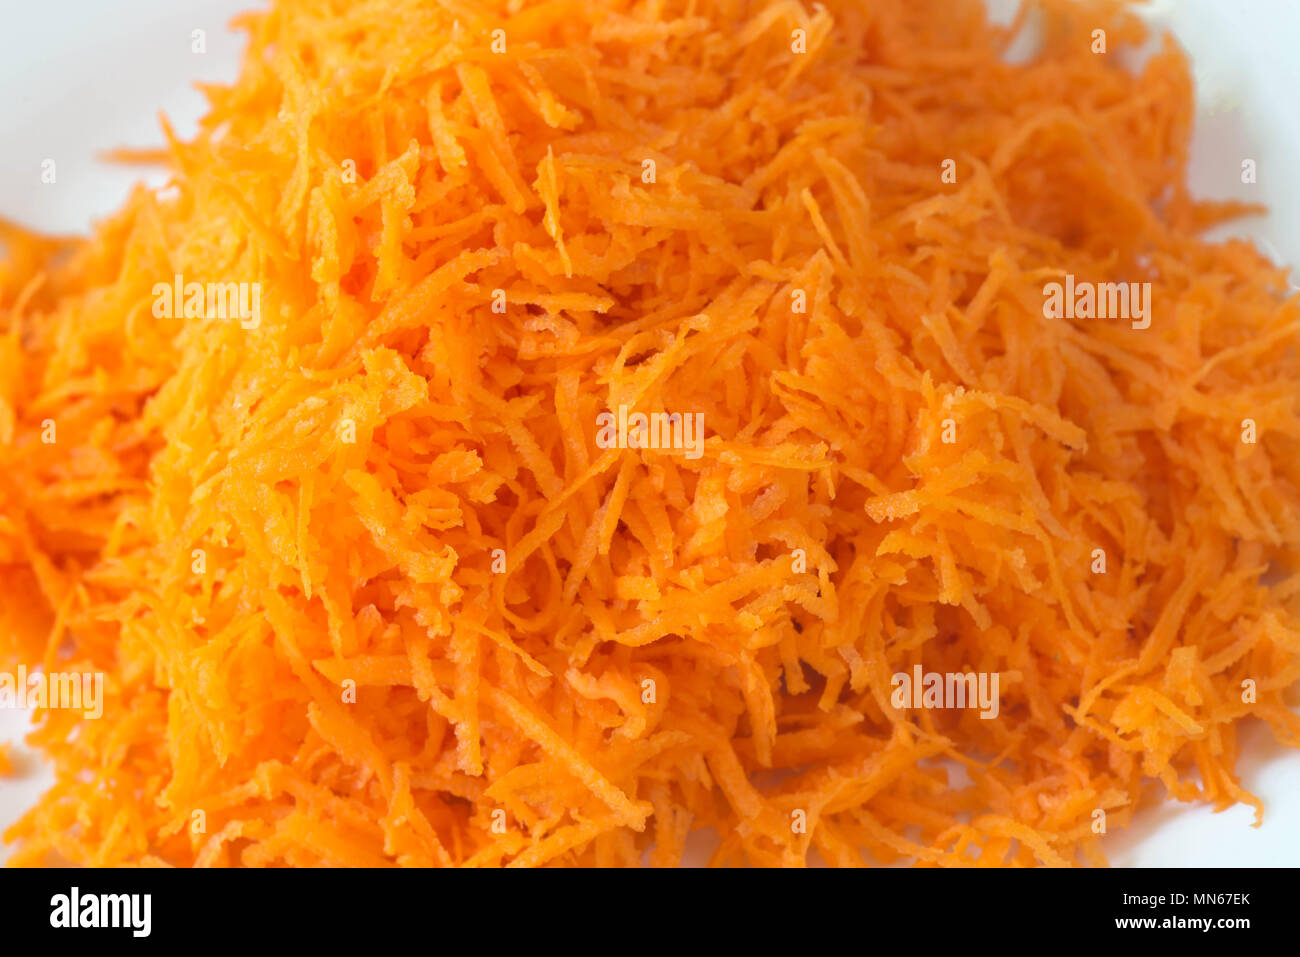 vegetarian salad with grated carrots on plate Stock Photo